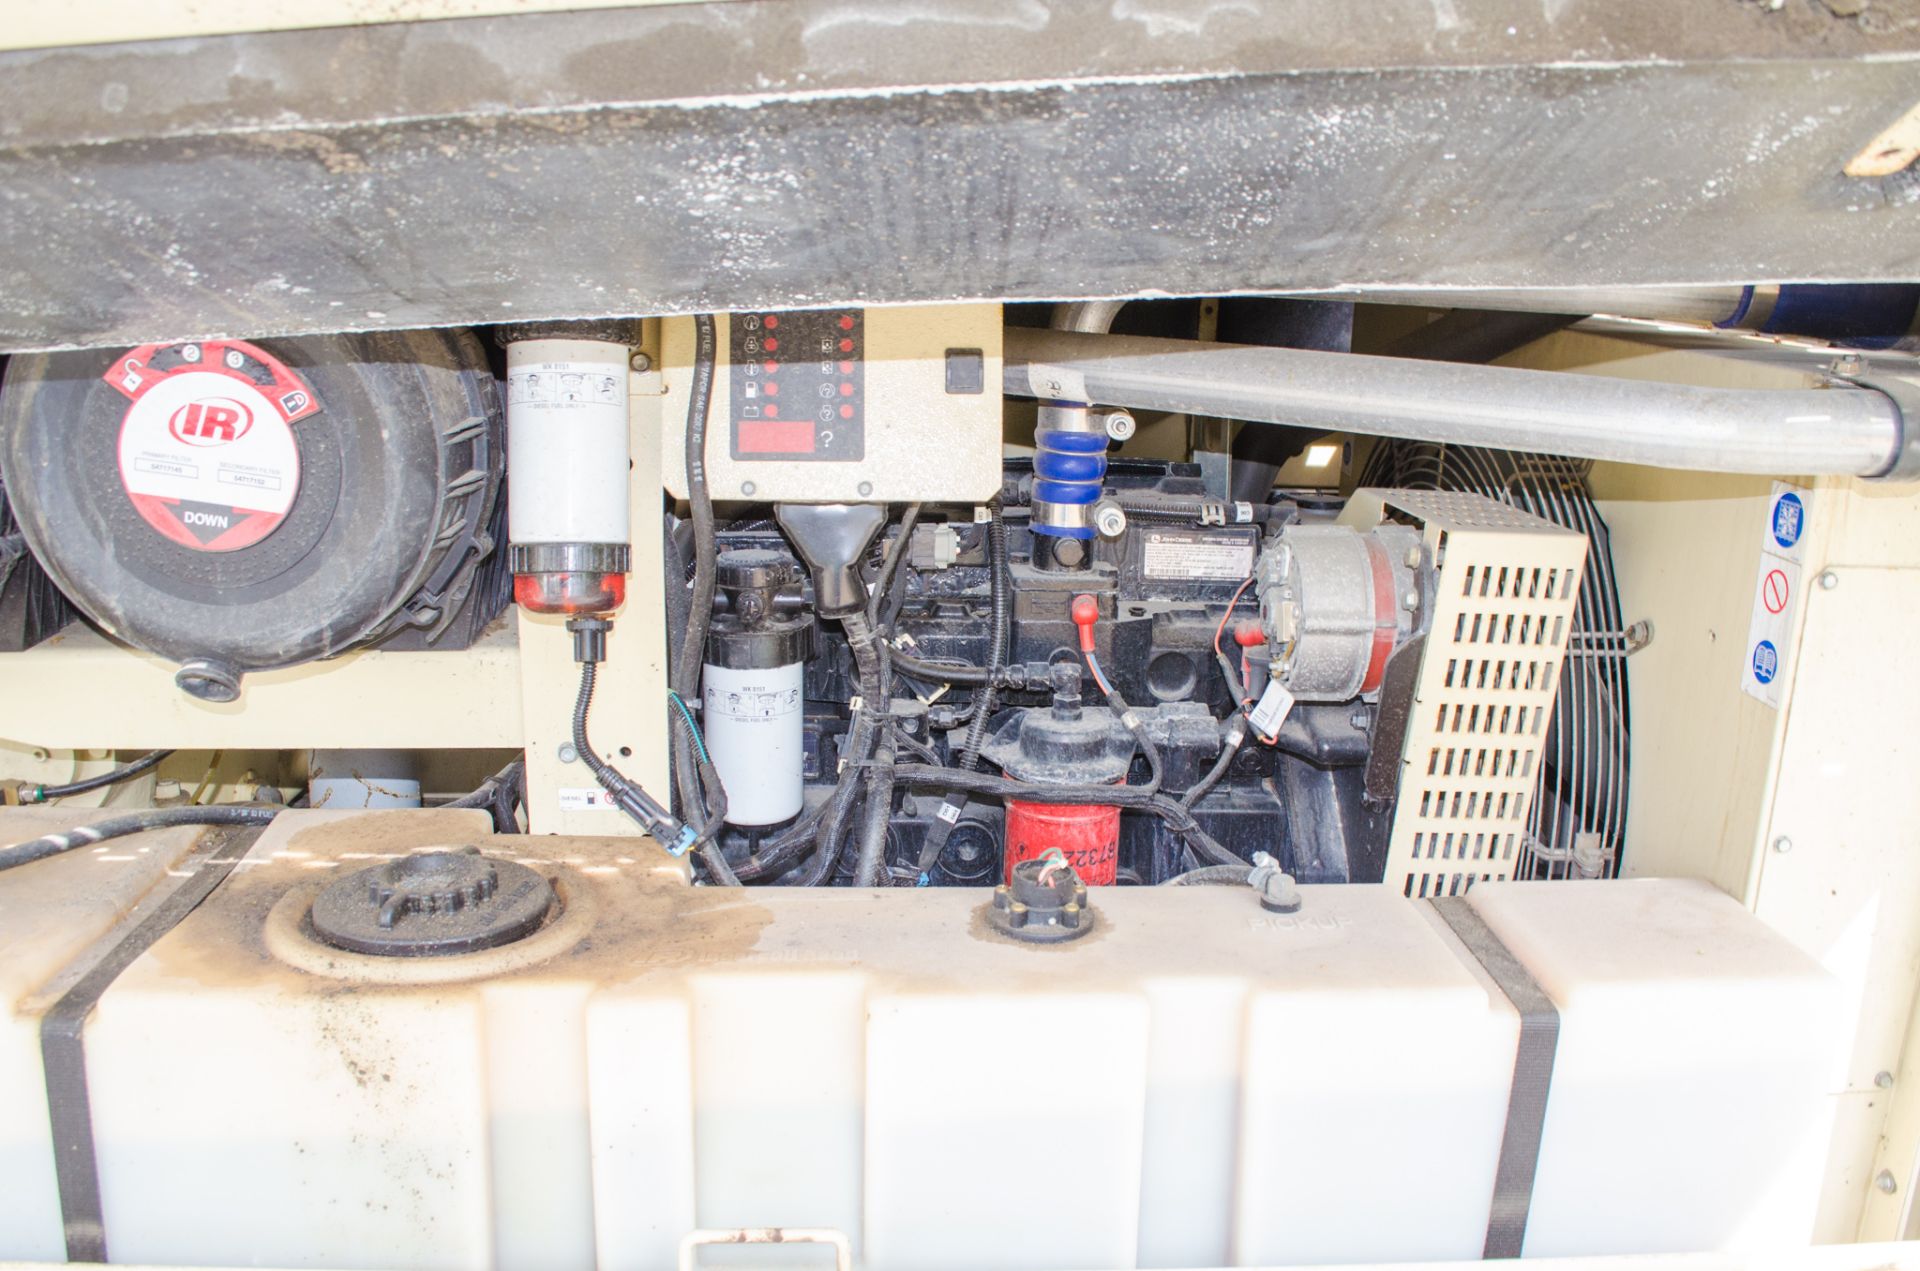 Doosan 7/120 fast tow diesel driven air compressor Year: 2012 S/N: 659291 Recorded Hours: 1654 - Image 3 of 5